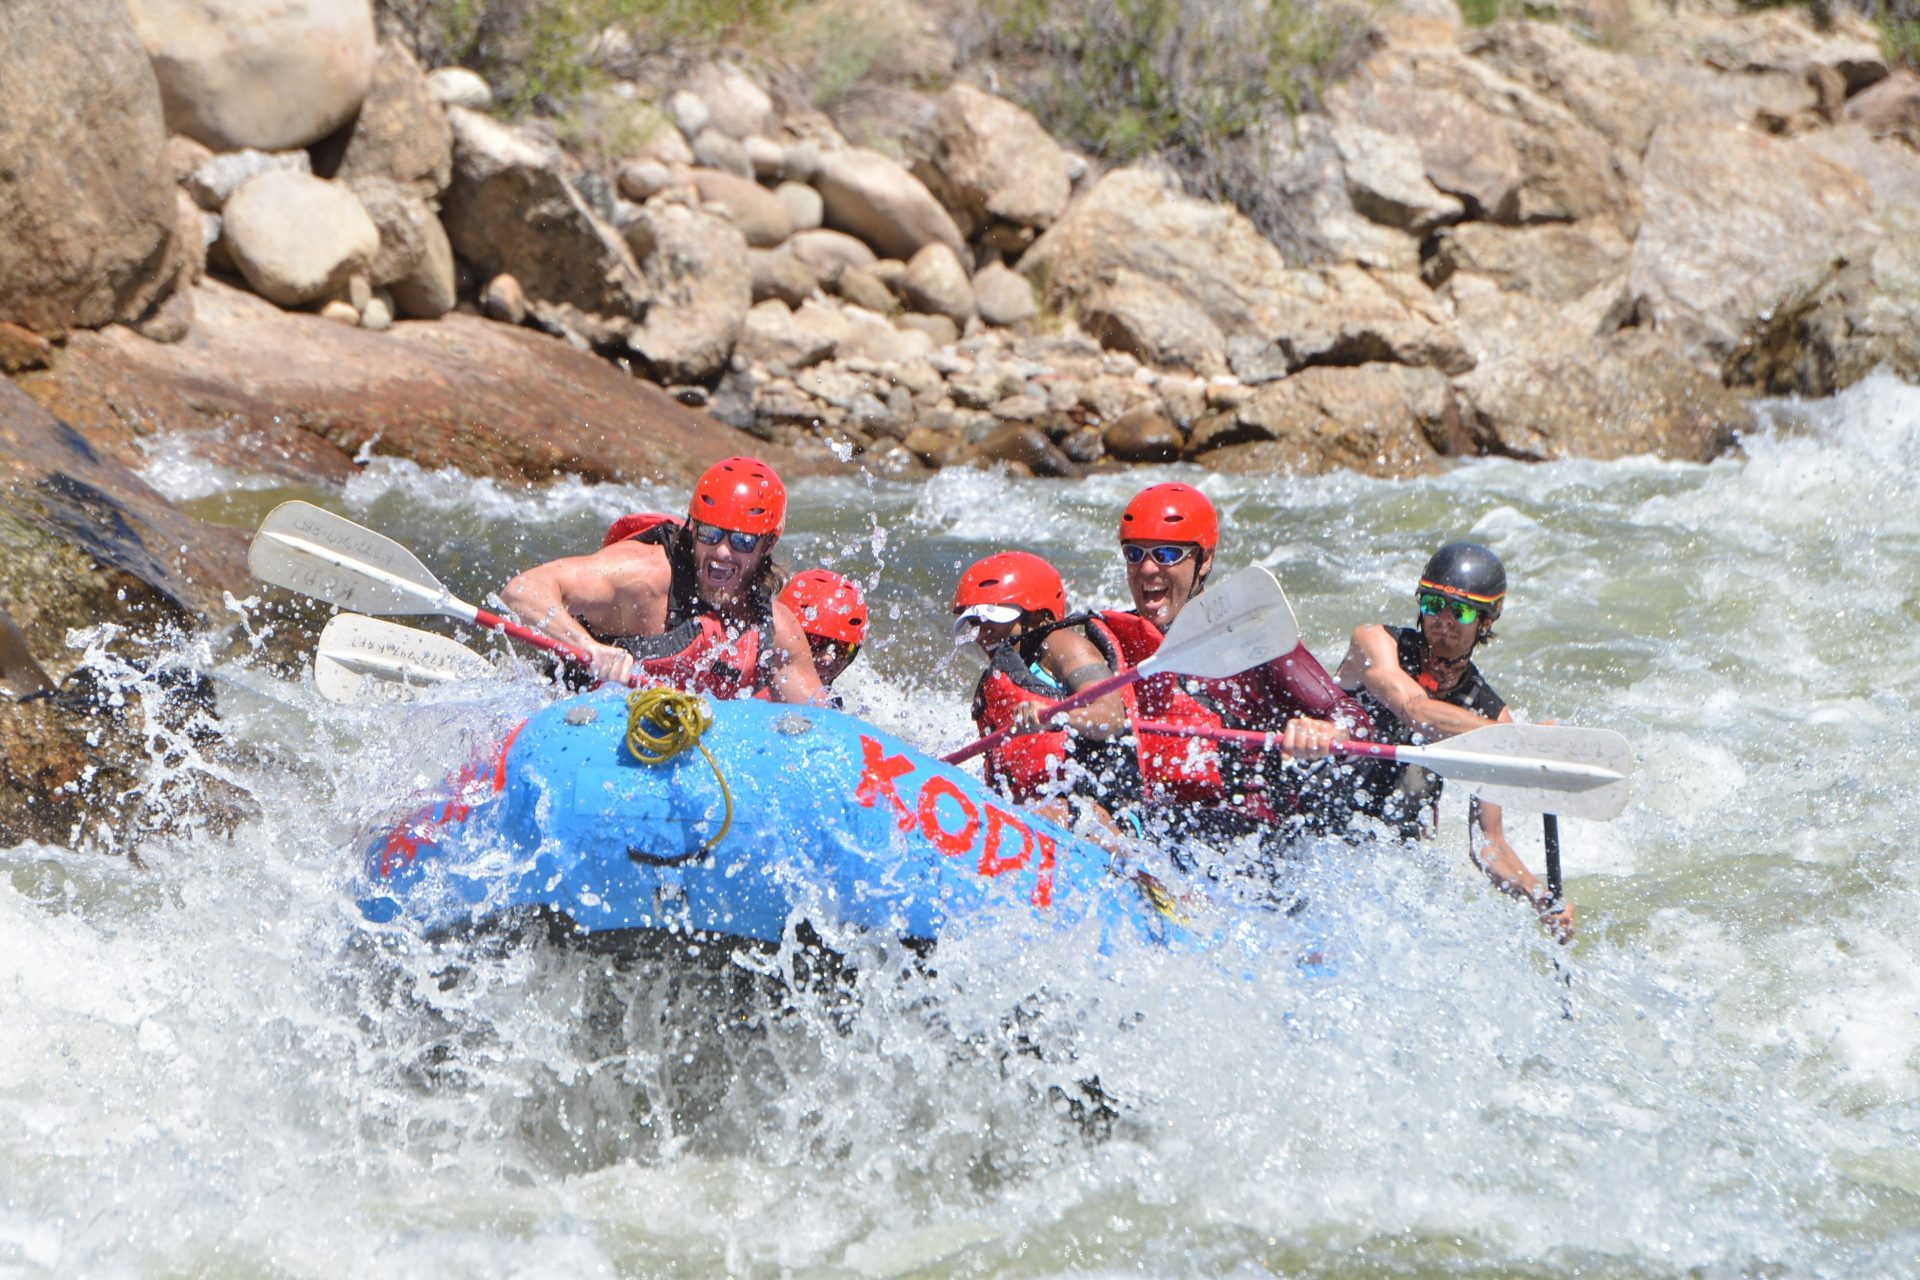 For the adventurous tourists, the Browns Canyon half day rafting experience is the best choice